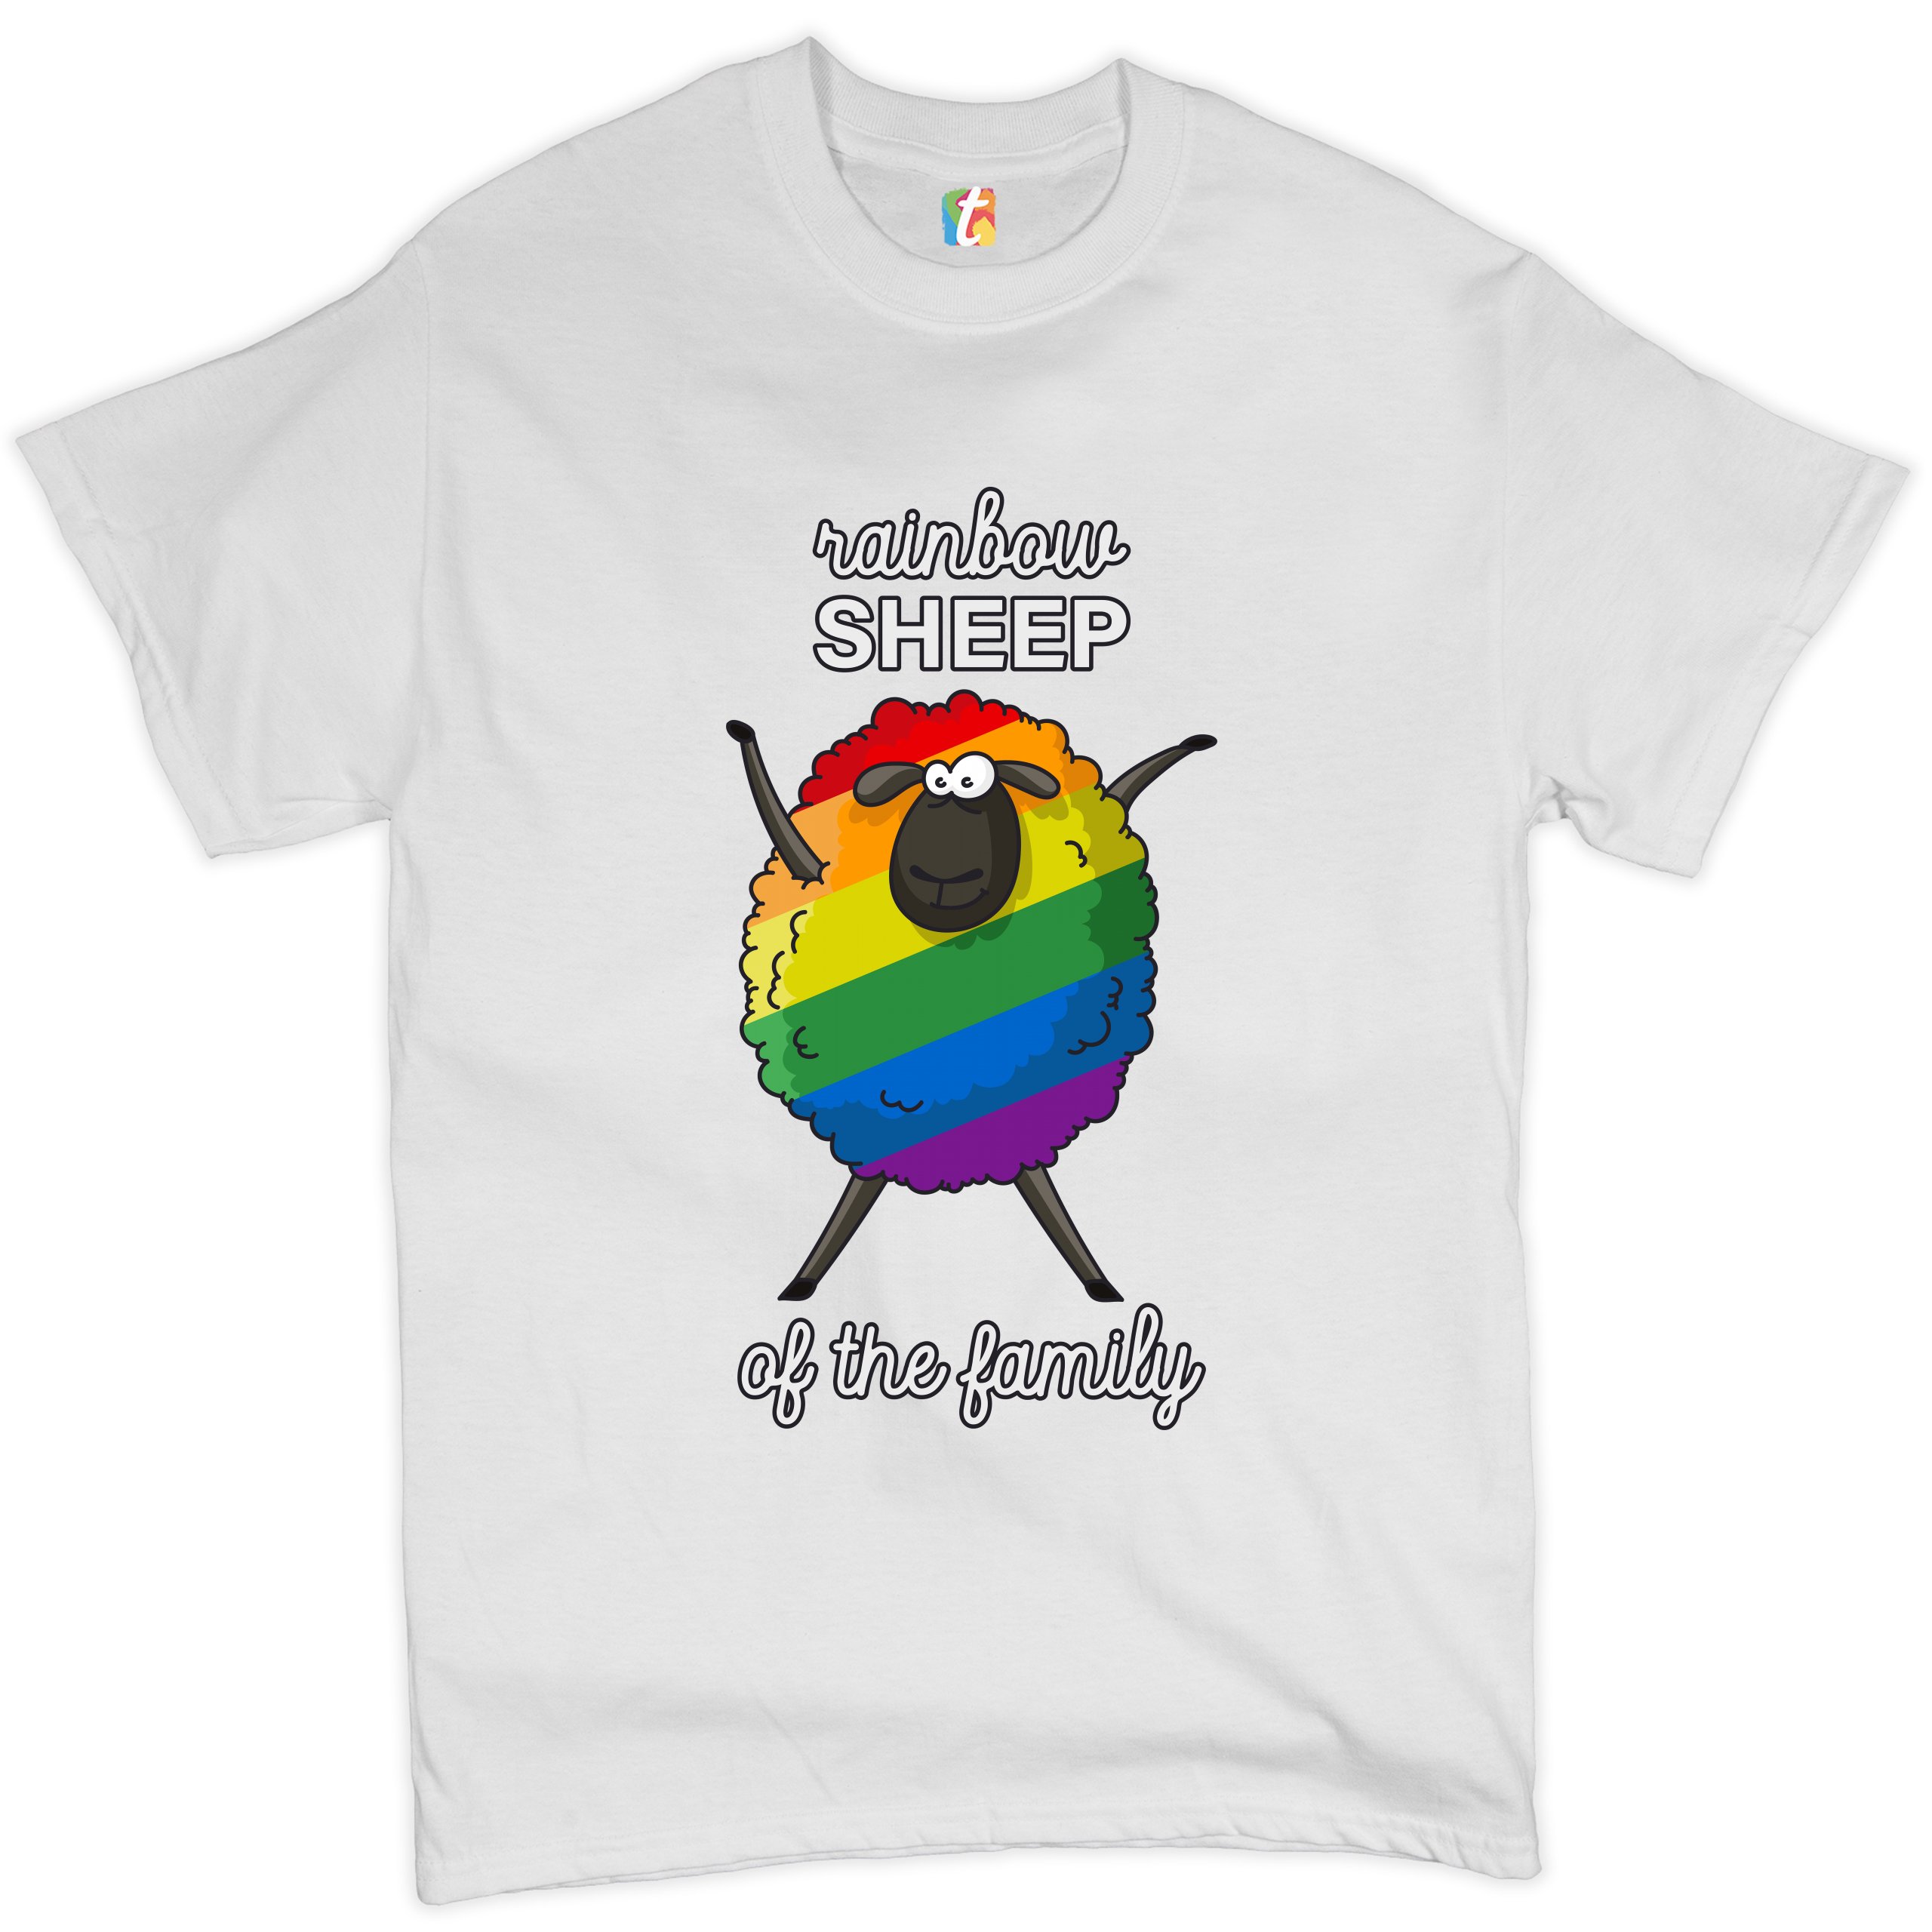 Rainbow Sheep of the Family T-shirt Gay Pride LGBT Support Funny Men's Tee